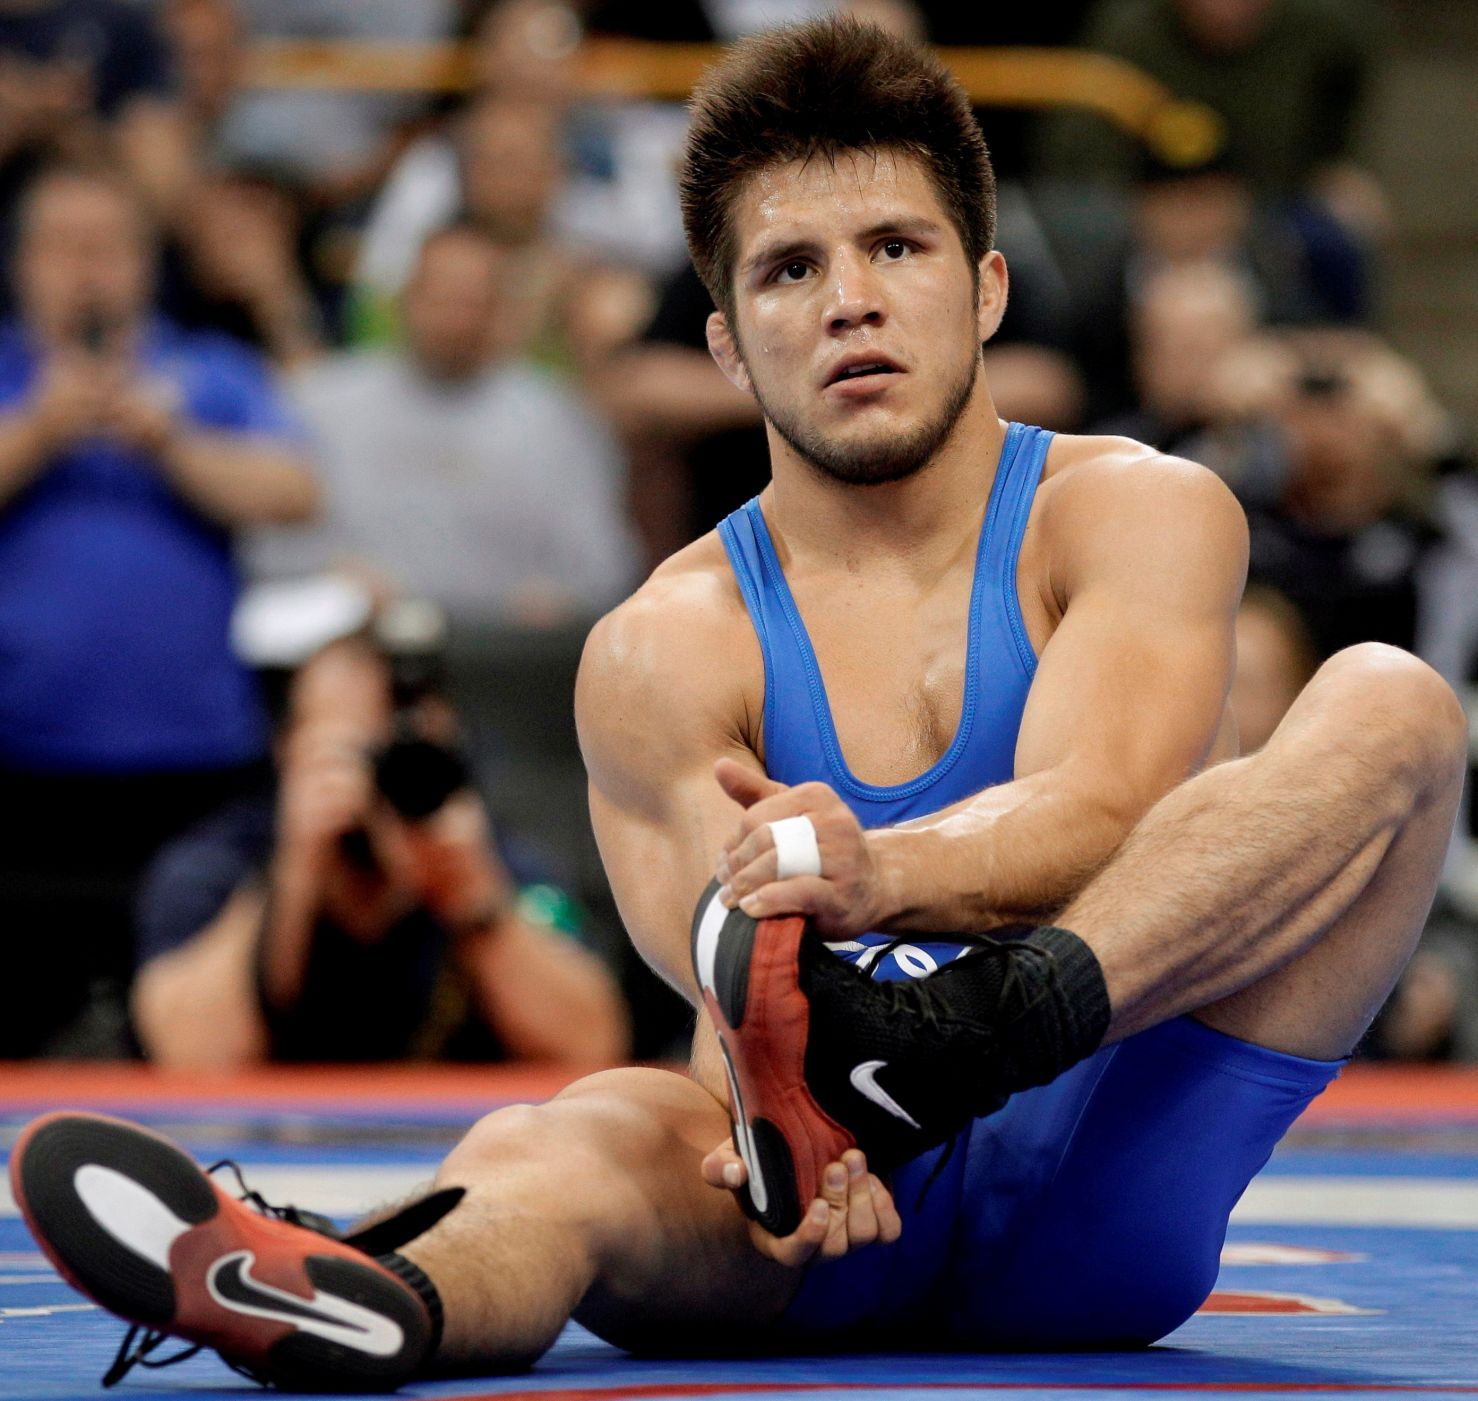 Henry Cejudo toppled at Olympic trials, retires from wrestling News gazette